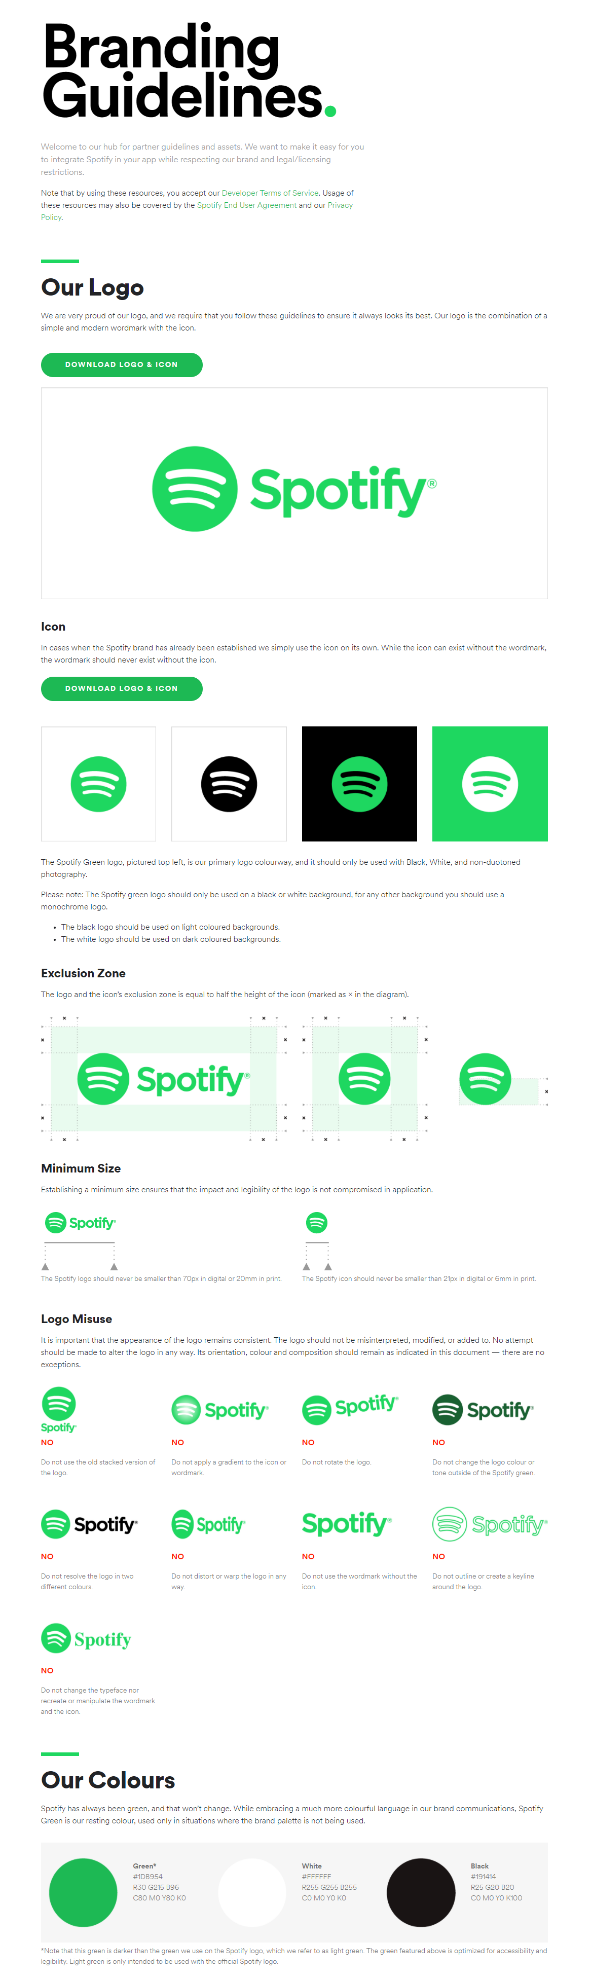 Infographic showing Spotify’s branding guidelines including logo sizes and brand colors